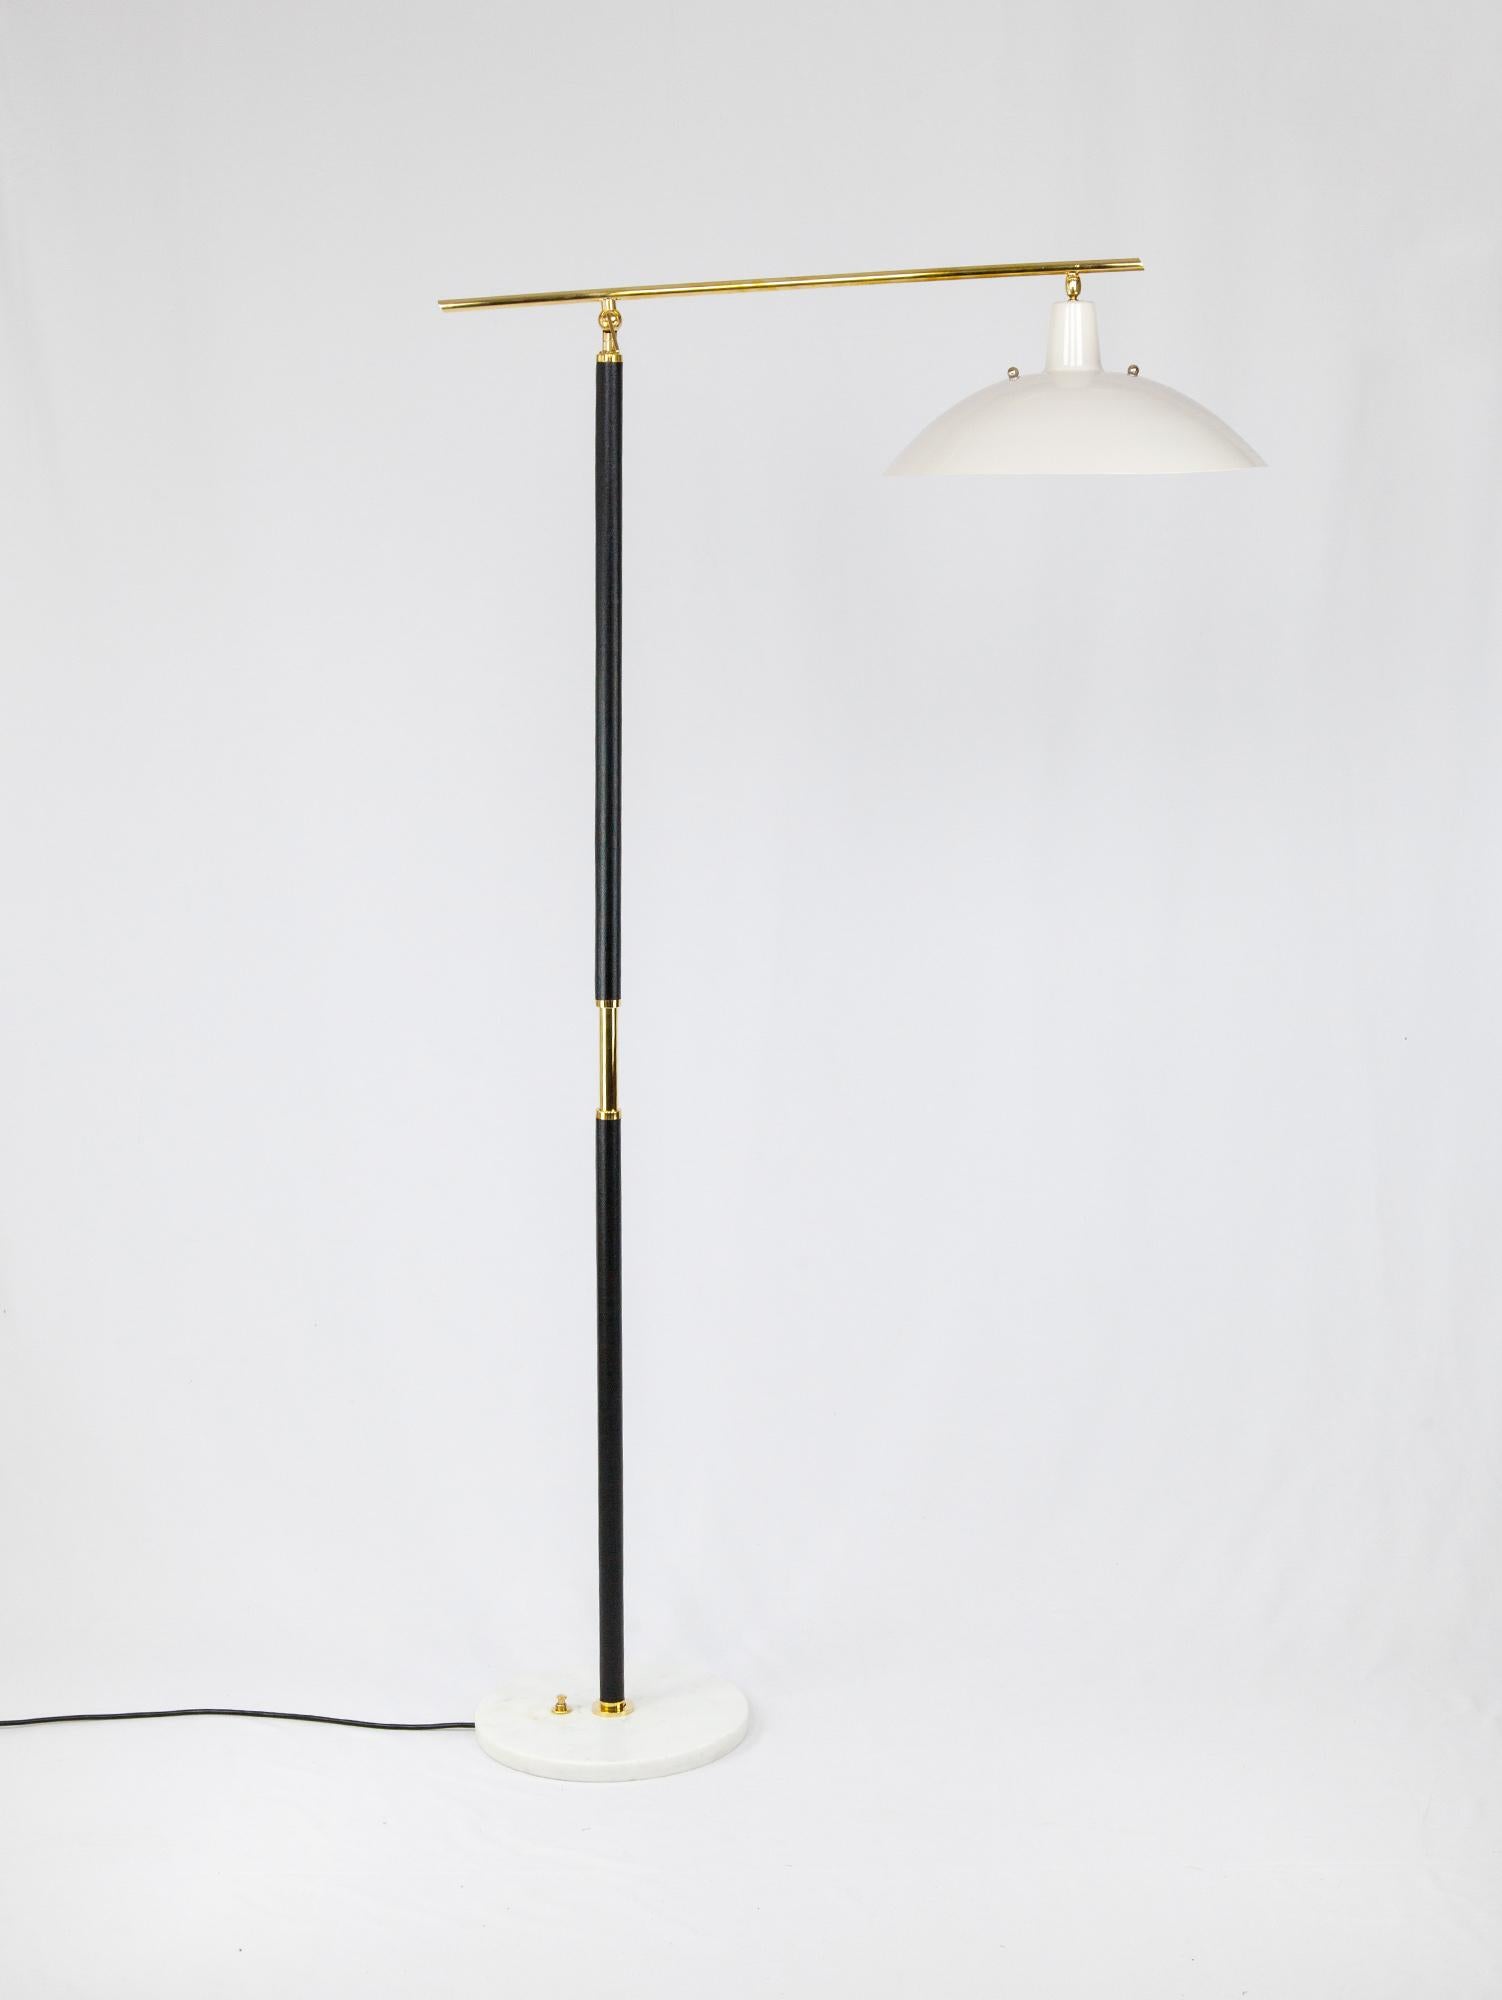 Sleek and tall Italian floor lamp with brass and marble details. The long brass arm and white metal shade are complimented by a black vinyl wrapped stand and white marble base. Beautiful Italian craftsmanship is seen throughout in the details. Both